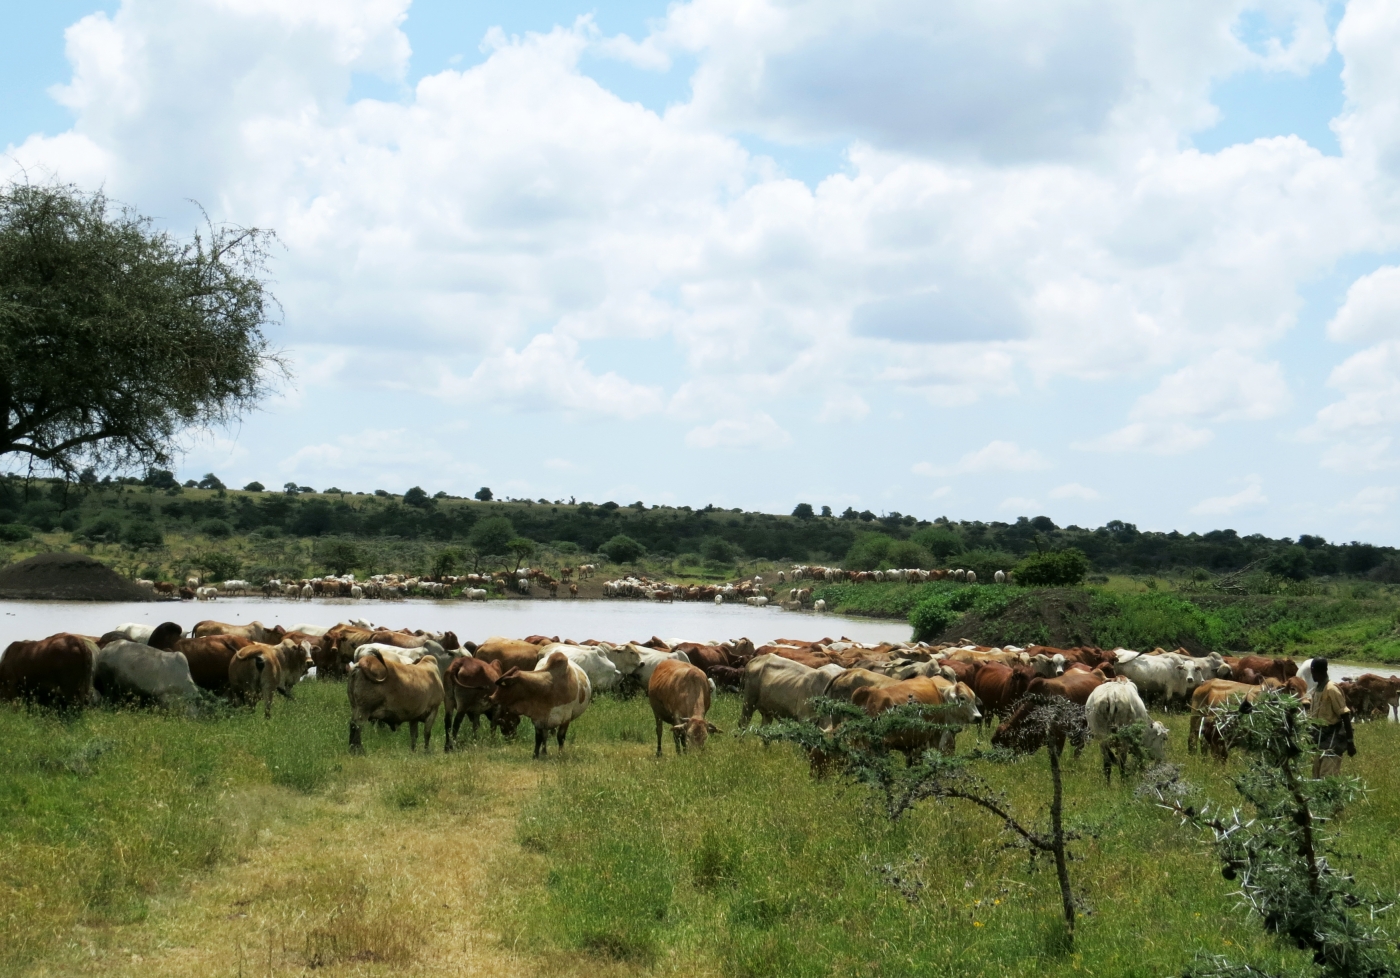 A herd of cattle grazing in the grass near a pond in Laikipia, Kenya